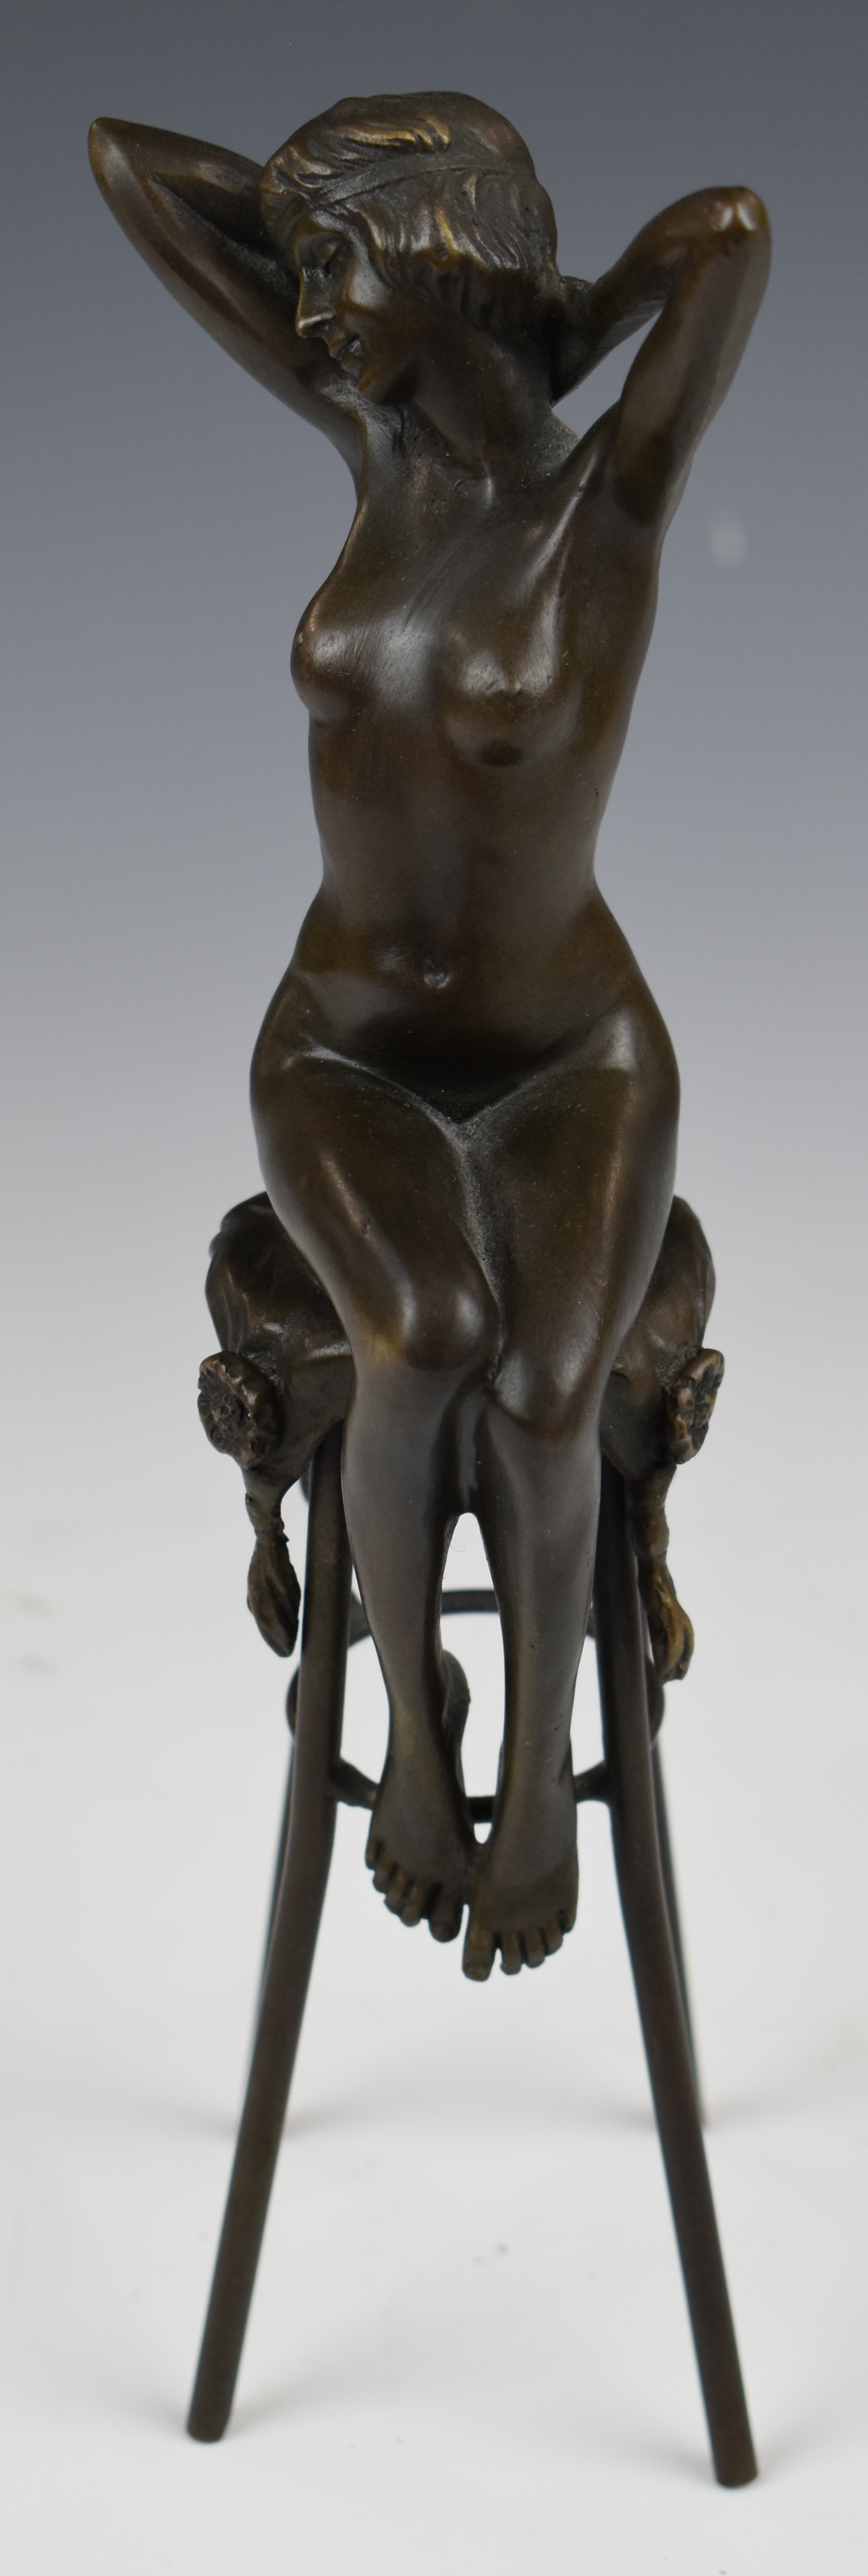 Bronze study of a nude lady on a high stool, height 25cm